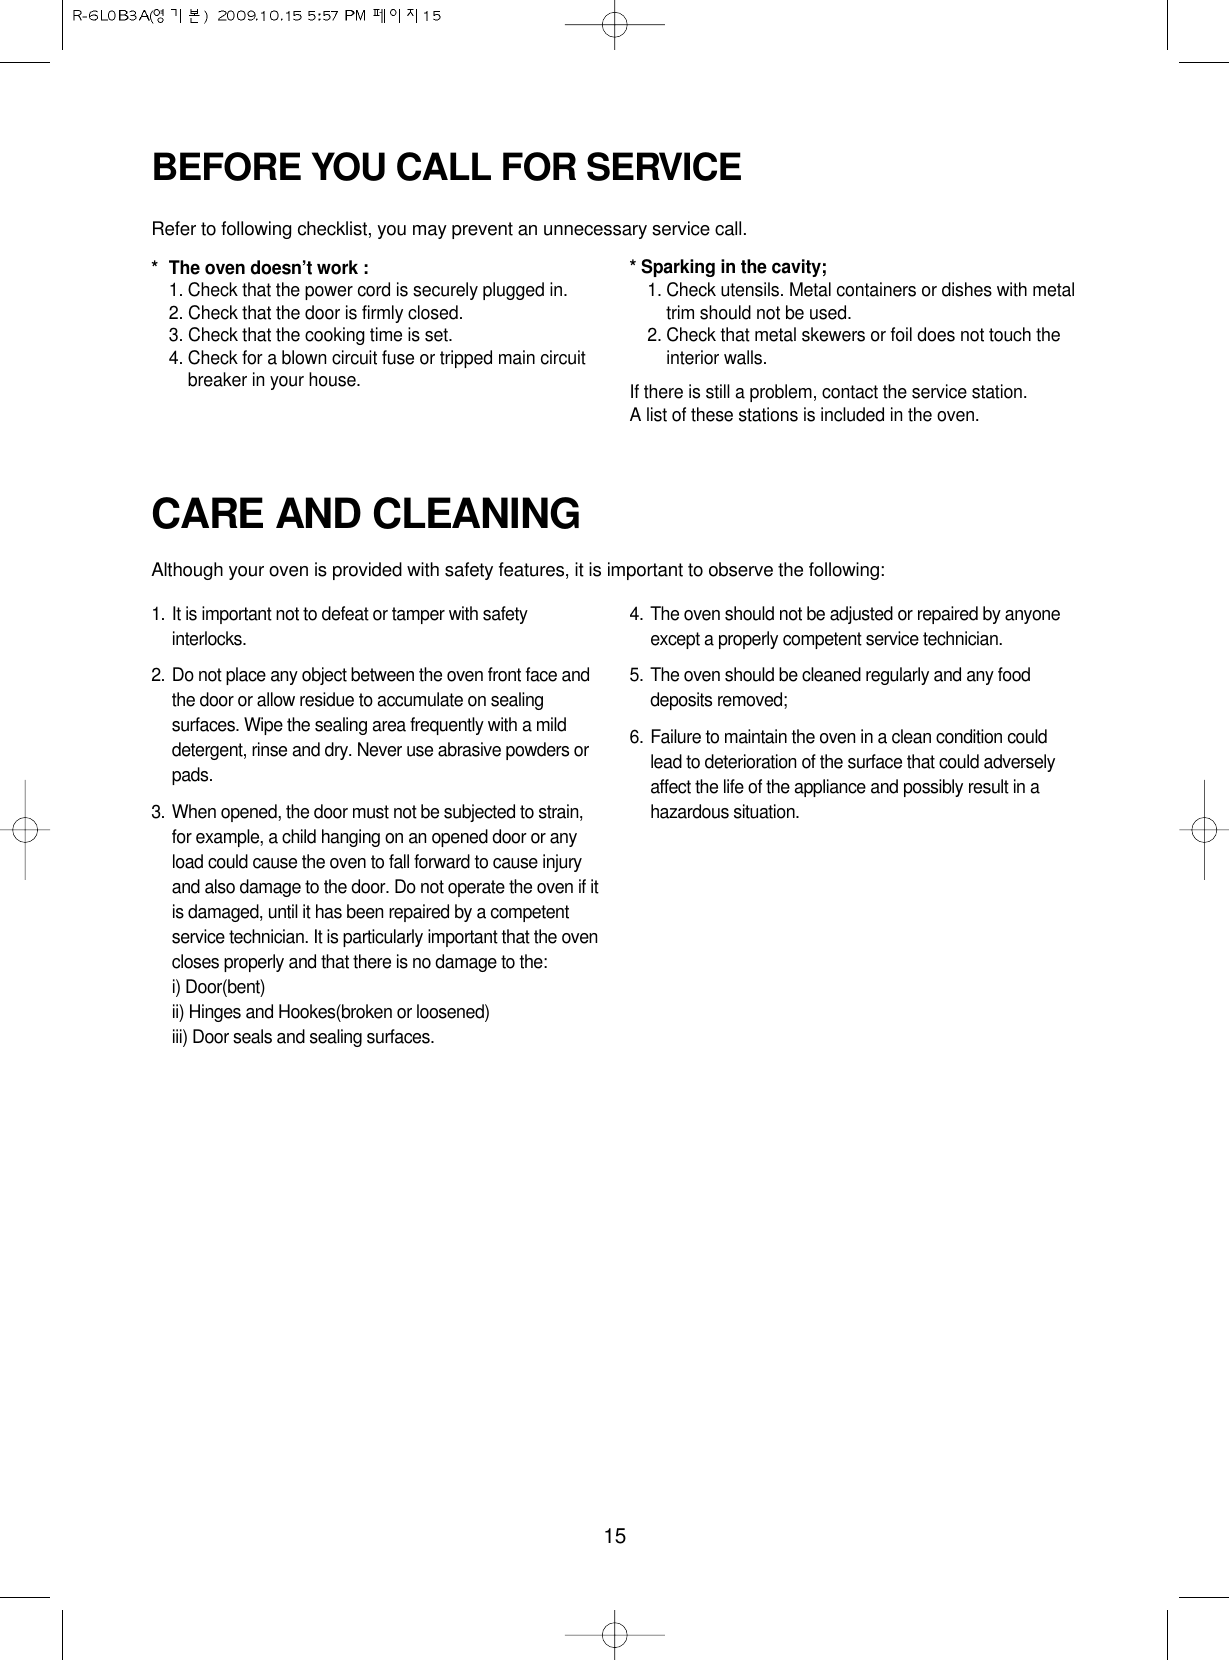 15CARE AND CLEANINGAlthough your oven is provided with safety features, it is important to observe the following:1. It is important not to defeat or tamper with safetyinterlocks.2. Do not place any object between the oven front face andthe door or allow residue to accumulate on sealingsurfaces. Wipe the sealing area frequently with a milddetergent, rinse and dry. Never use abrasive powders orpads.3. When opened, the door must not be subjected to strain,for example, a child hanging on an opened door or anyload could cause the oven to fall forward to cause injuryand also damage to the door. Do not operate the oven if itis damaged, until it has been repaired by a competentservice technician. It is particularly important that the ovencloses properly and that there is no damage to the:i) Door(bent)ii) Hinges and Hookes(broken or loosened)iii) Door seals and sealing surfaces.4. The oven should not be adjusted or repaired by anyoneexcept a properly competent service technician.5. The oven should be cleaned regularly and any fooddeposits removed;6. Failure to maintain the oven in a clean condition couldlead to deterioration of the surface that could adverselyaffect the life of the appliance and possibly result in ahazardous situation.BEFORE YOU CALL FOR SERVICERefer to following checklist, you may prevent an unnecessary service call.*The oven doesn’t work :1. Check that the power cord is securely plugged in.2. Check that the door is firmly closed.3. Check that the cooking time is set.4. Check for a blown circuit fuse or tripped main circuitbreaker in your house.* Sparking in the cavity;1. Check utensils. Metal containers or dishes with metaltrim should not be used.2. Check that metal skewers or foil does not touch theinterior walls.If there is still a problem, contact the service station.A list of these stations is included in the oven.